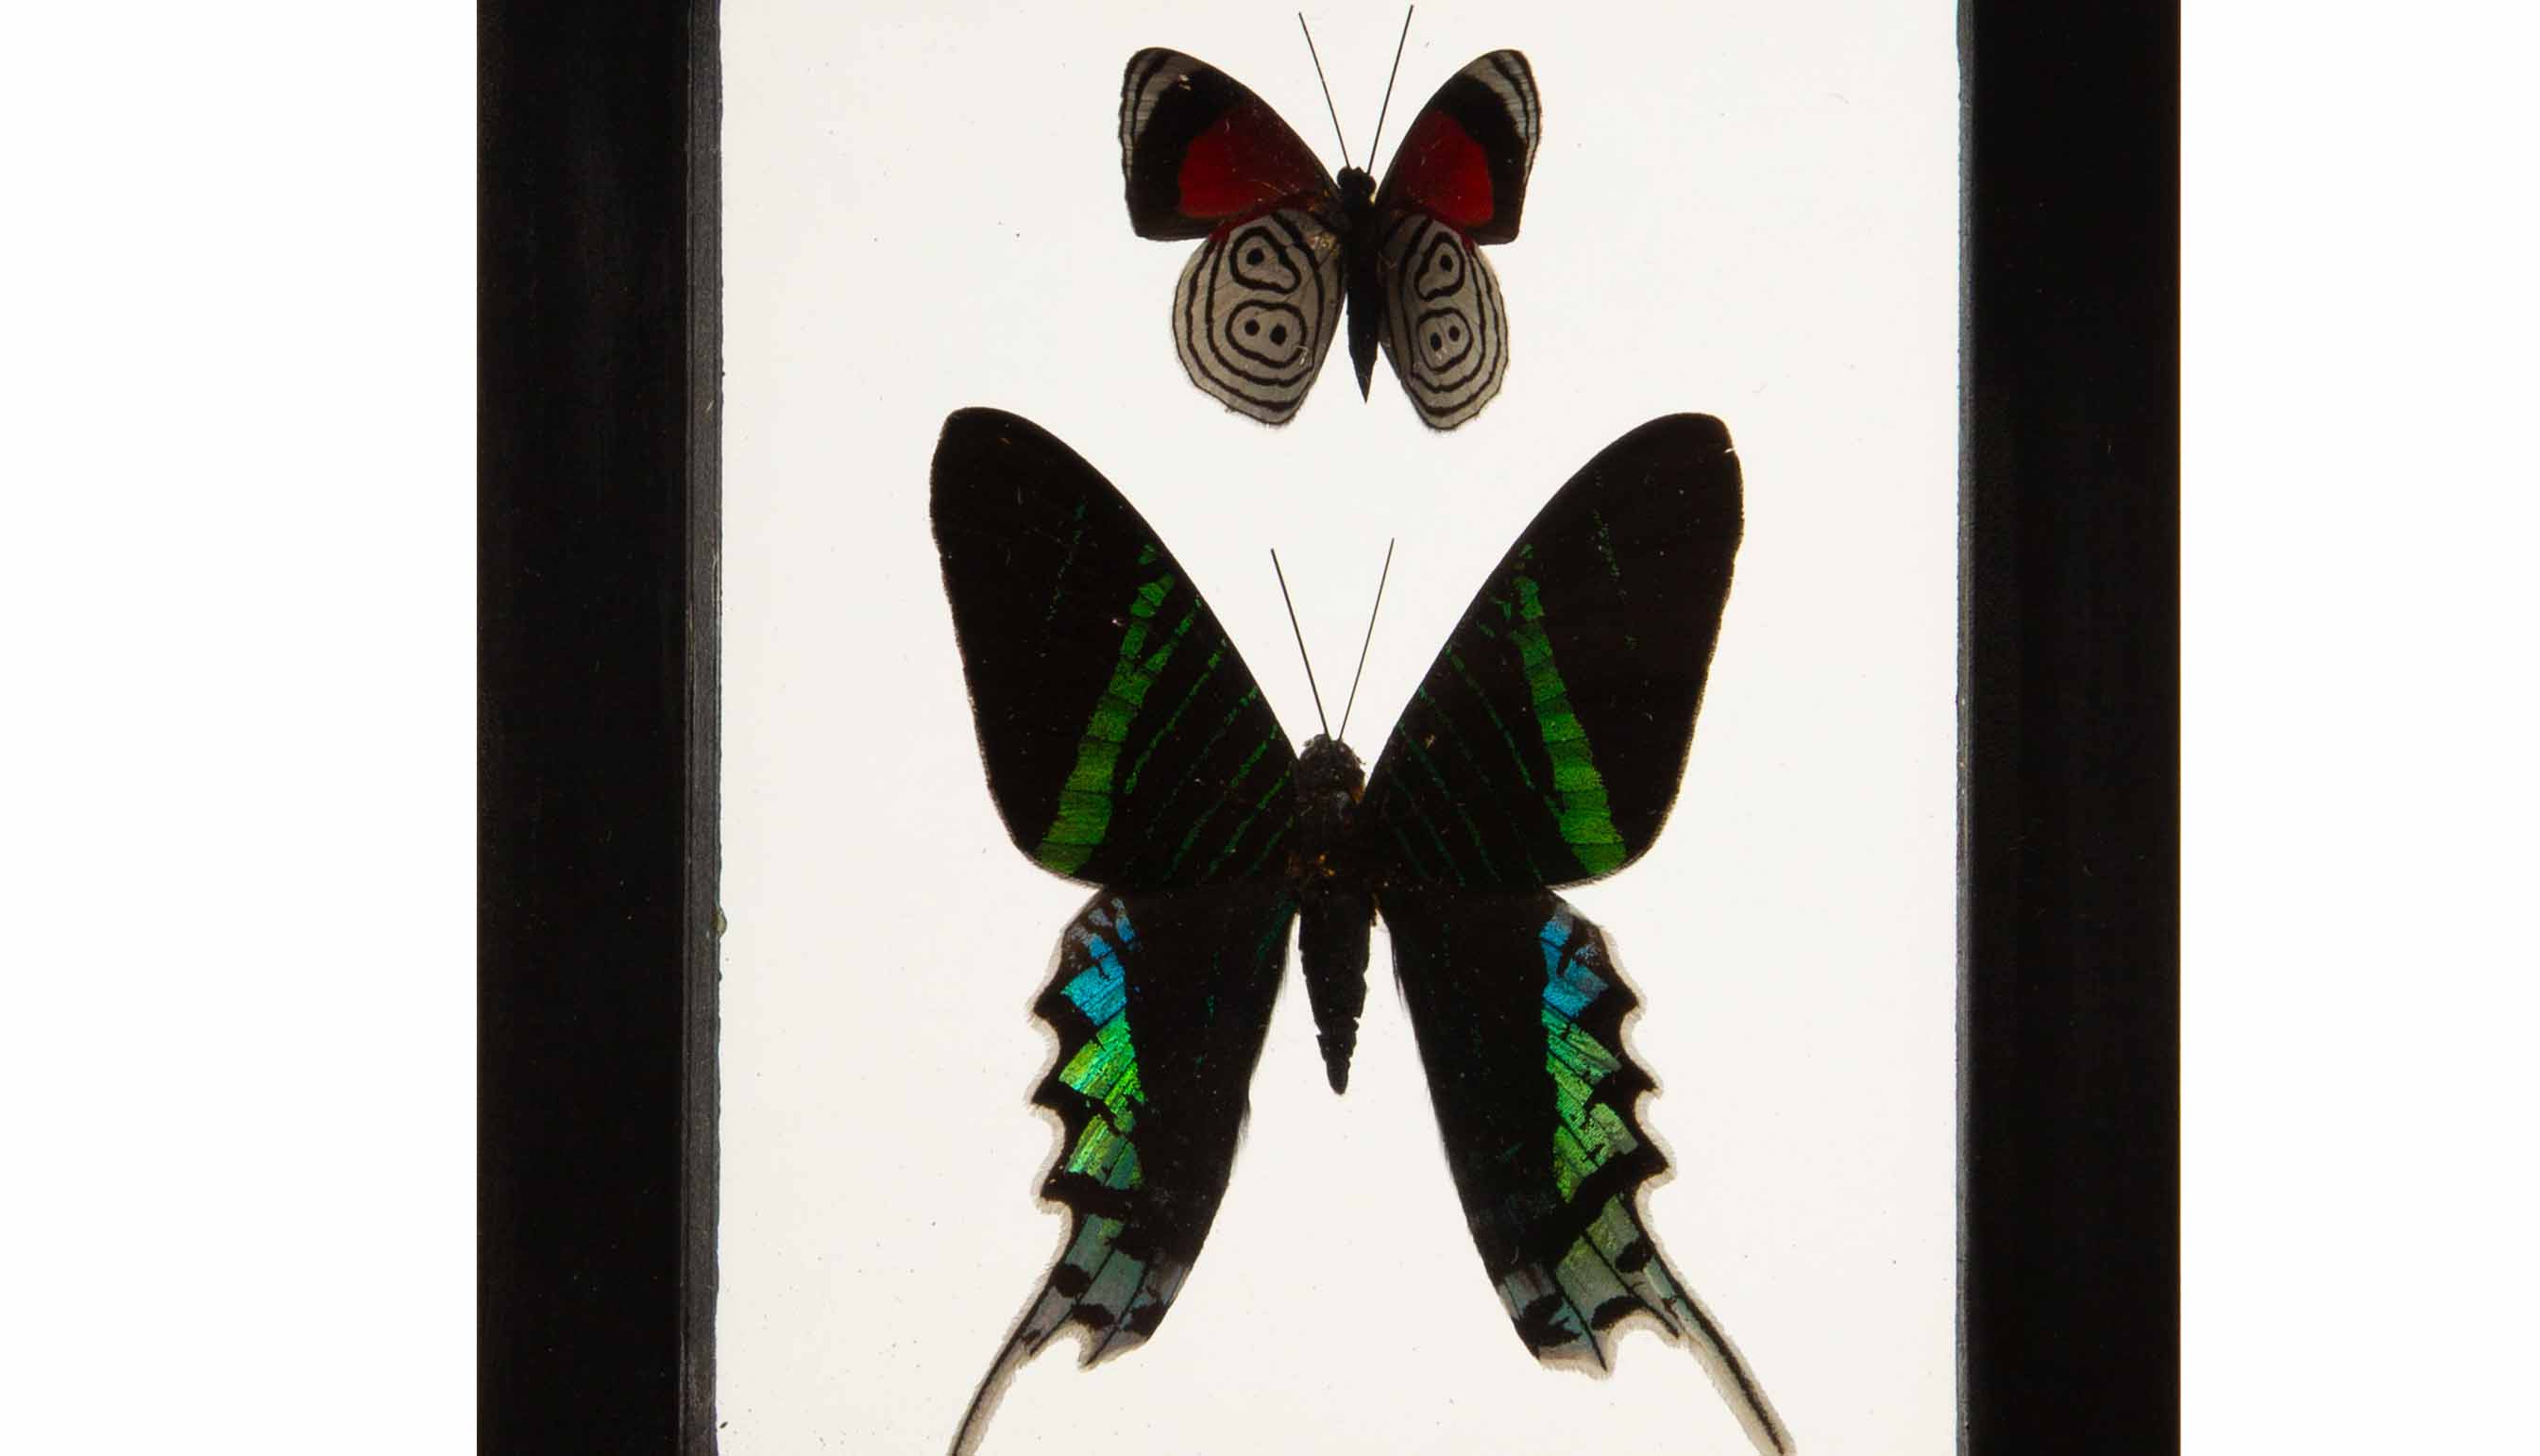 Butterflies in Double-Paned Glass and Ebonized Frame